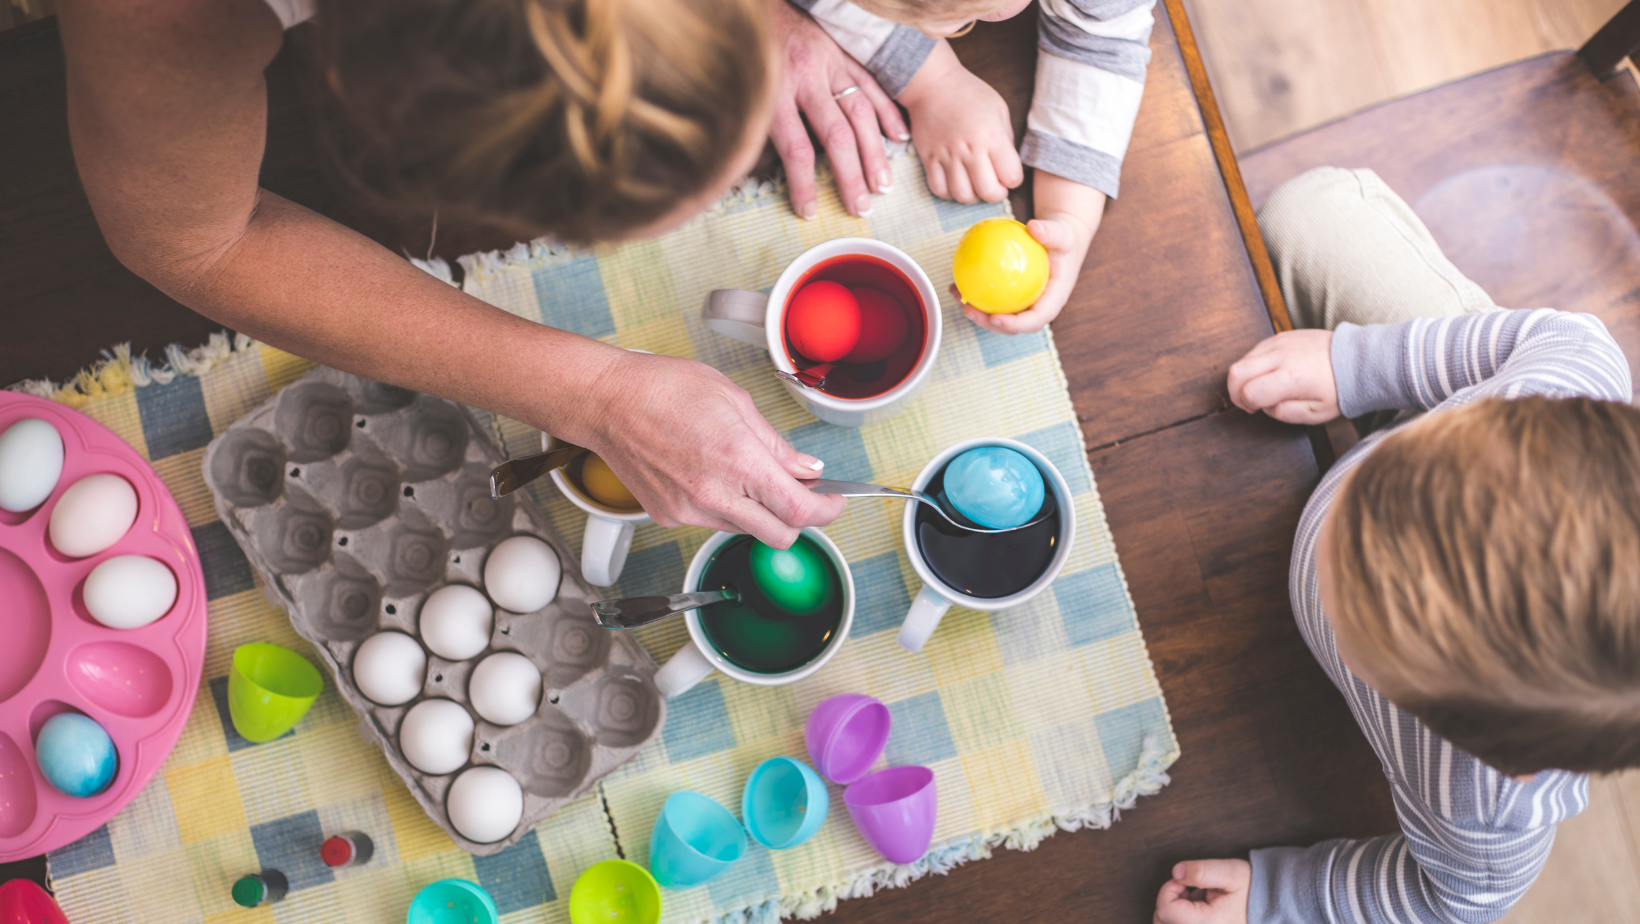 Have fun with your family and dye easter eggs this Easter!